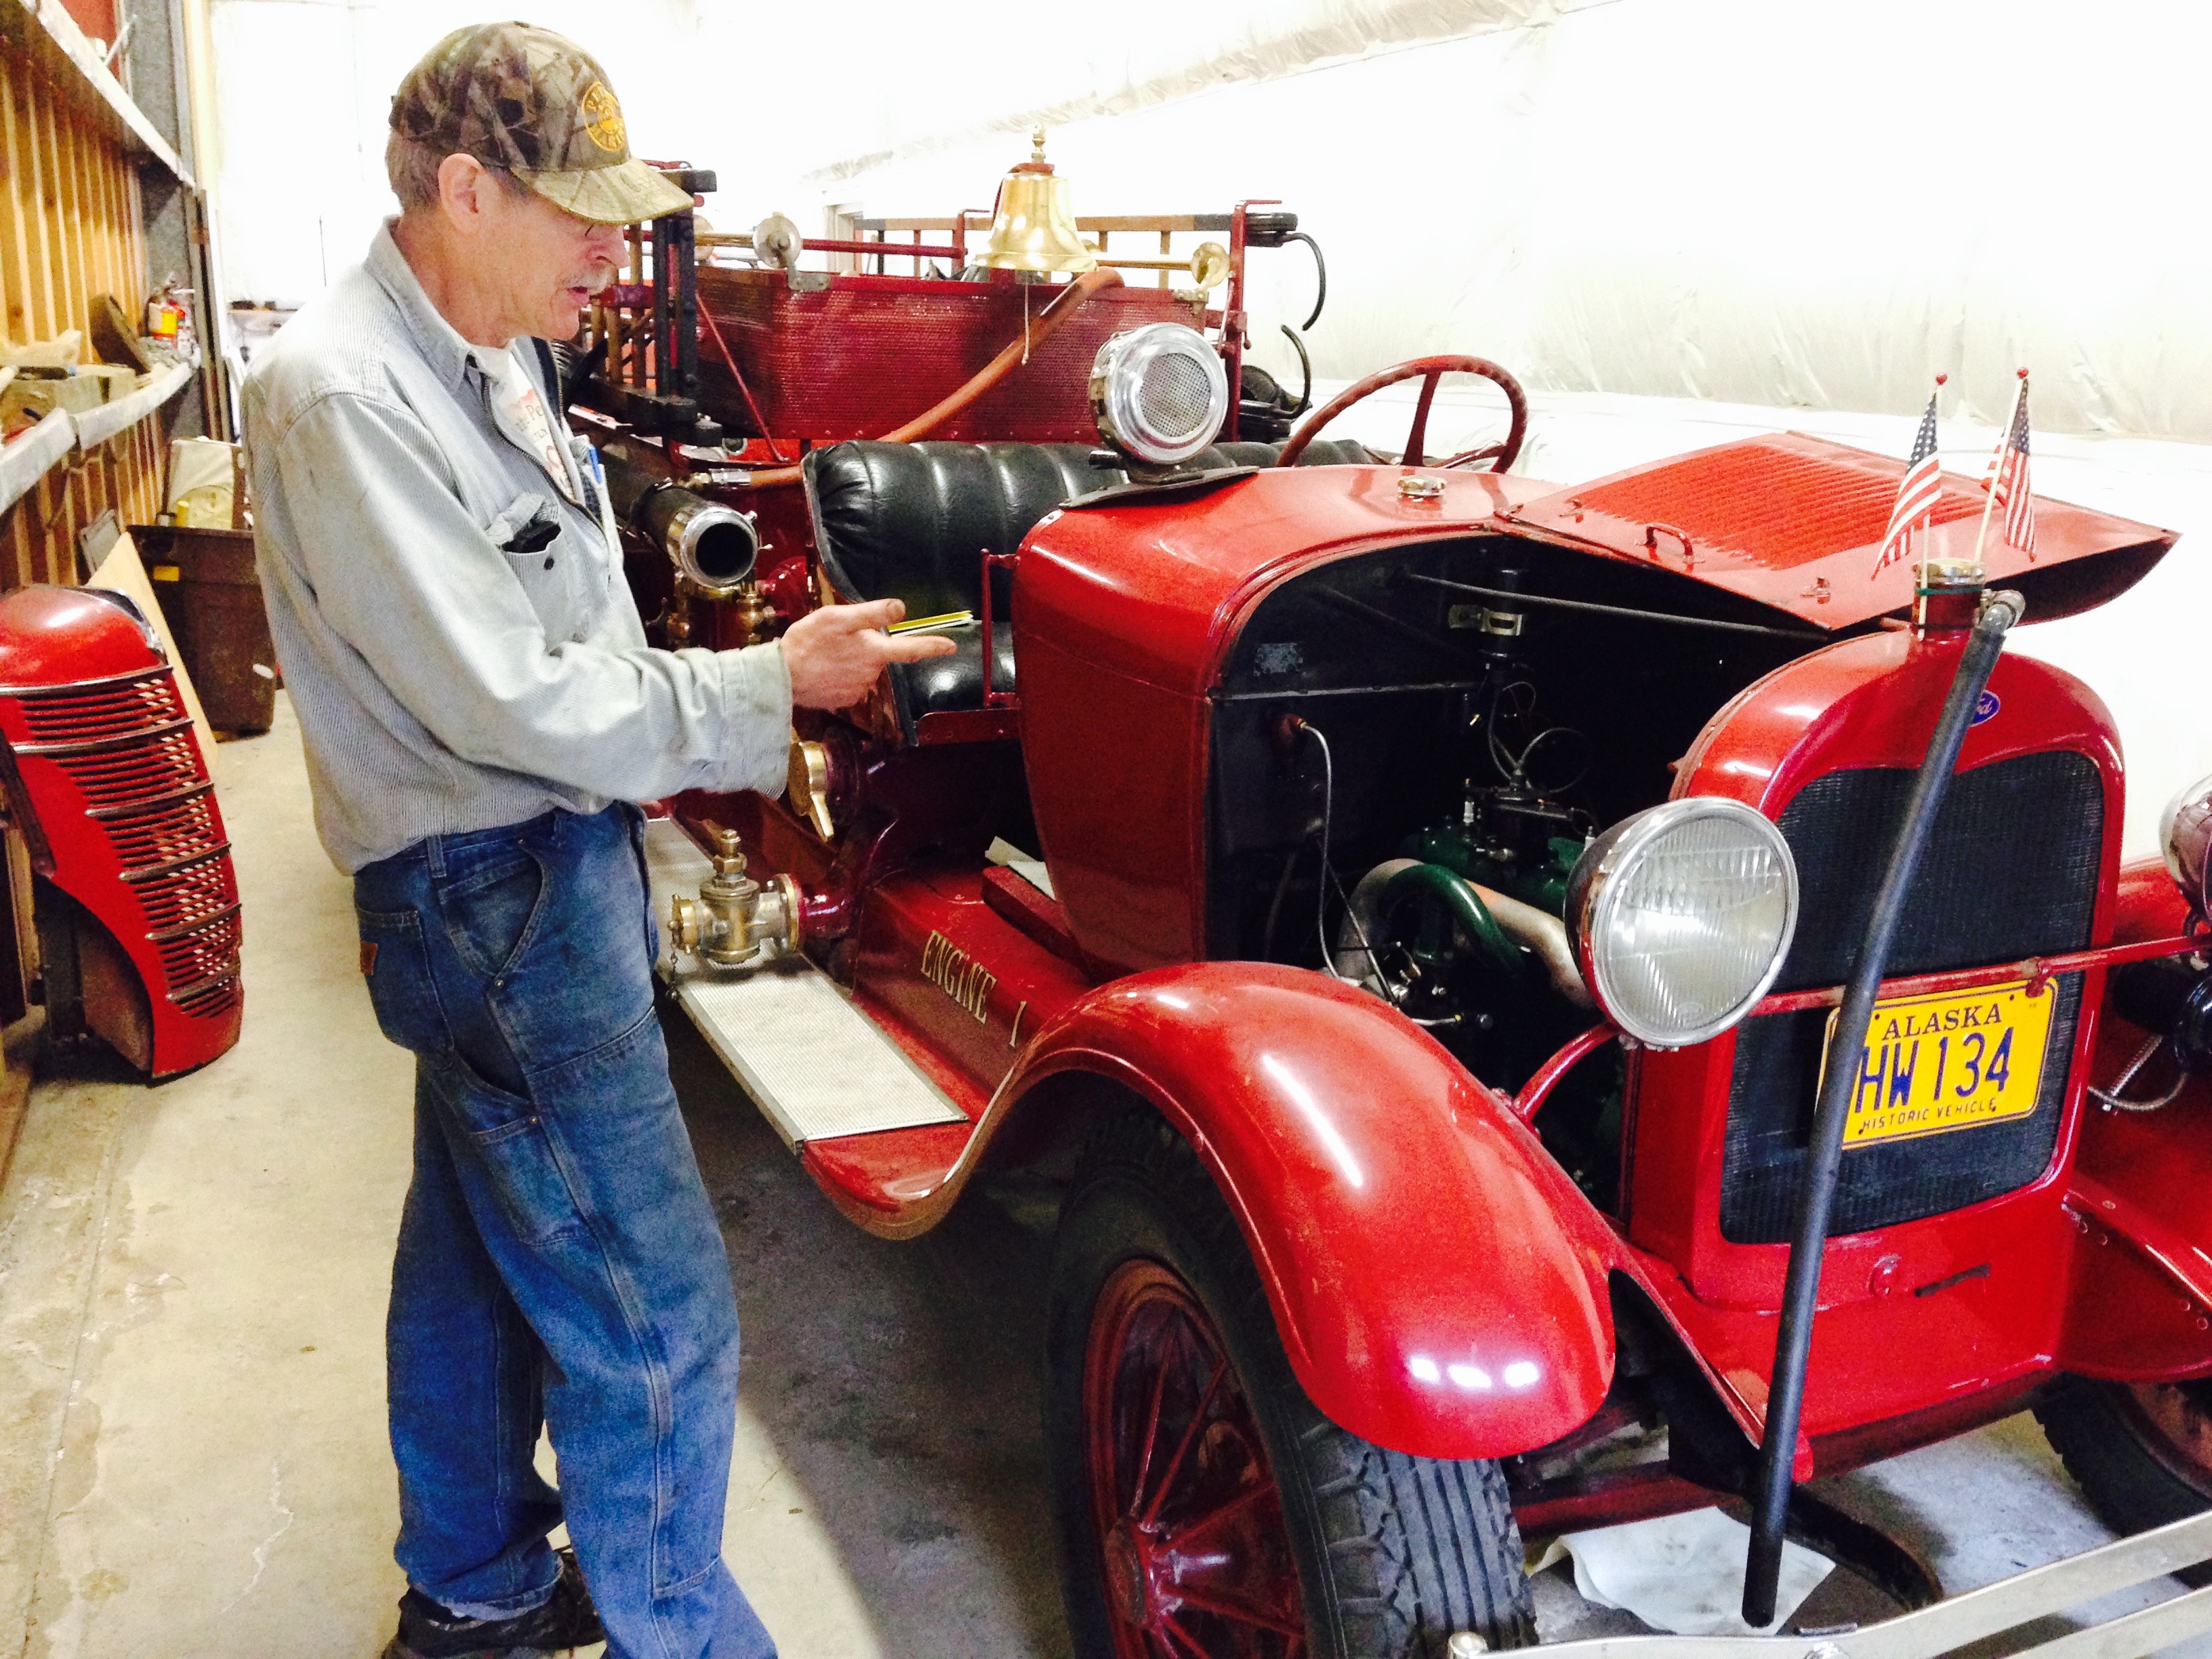 Jack Slaght points to the engine he overhauled in the 1928 Model A fire truck. (Photo by Angela Denning, KFSK - Petersburg)